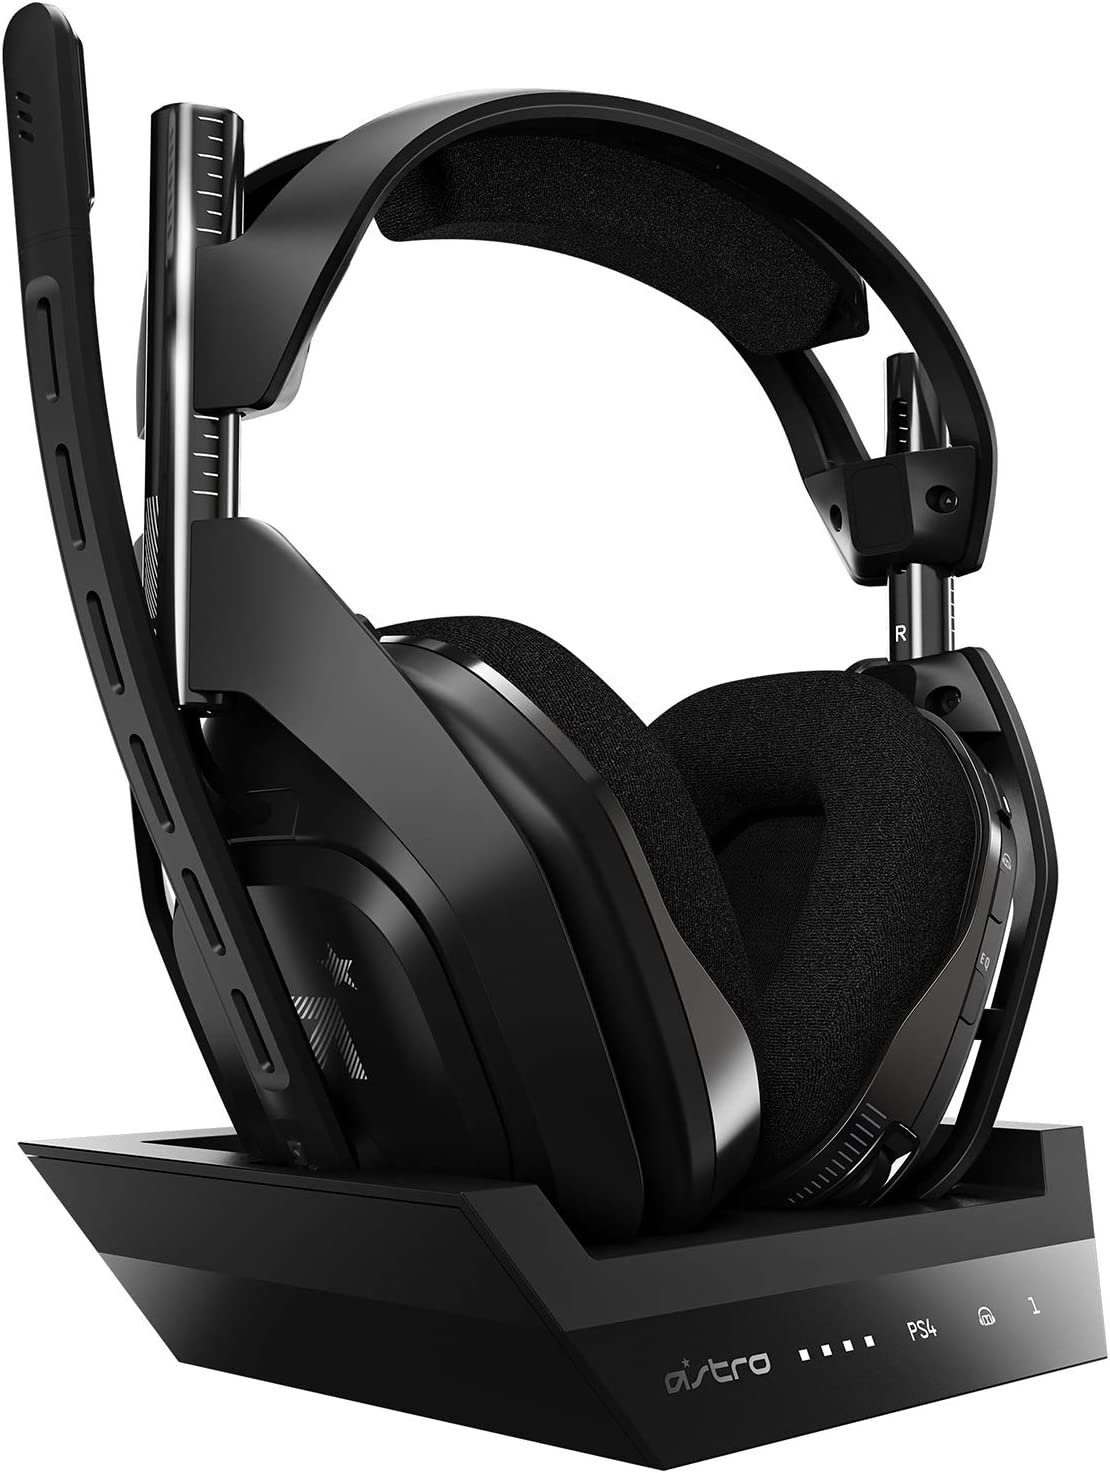 OTTO » online Gamer kaufen | Headsets Gamingheadsets